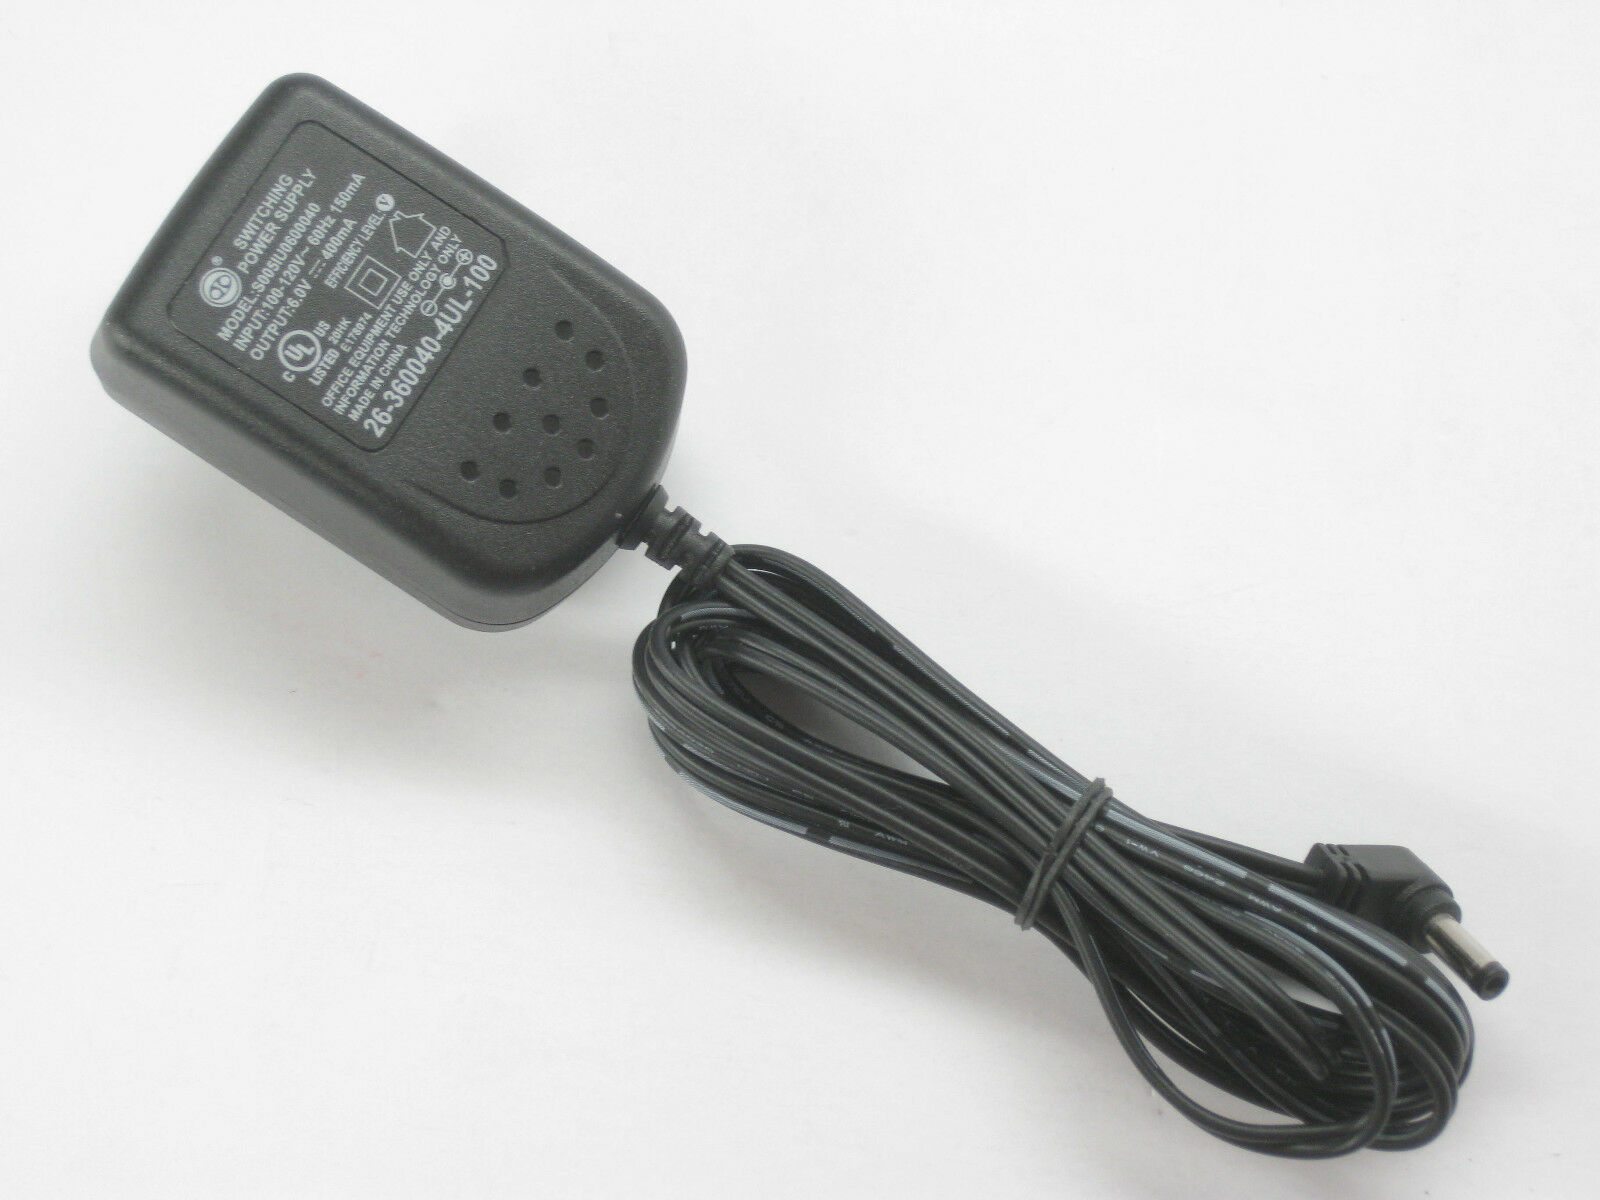 New AT&T VTECH S005IU0600060 6V 600MA AC/DC POWER SUPPLY ADAPTER